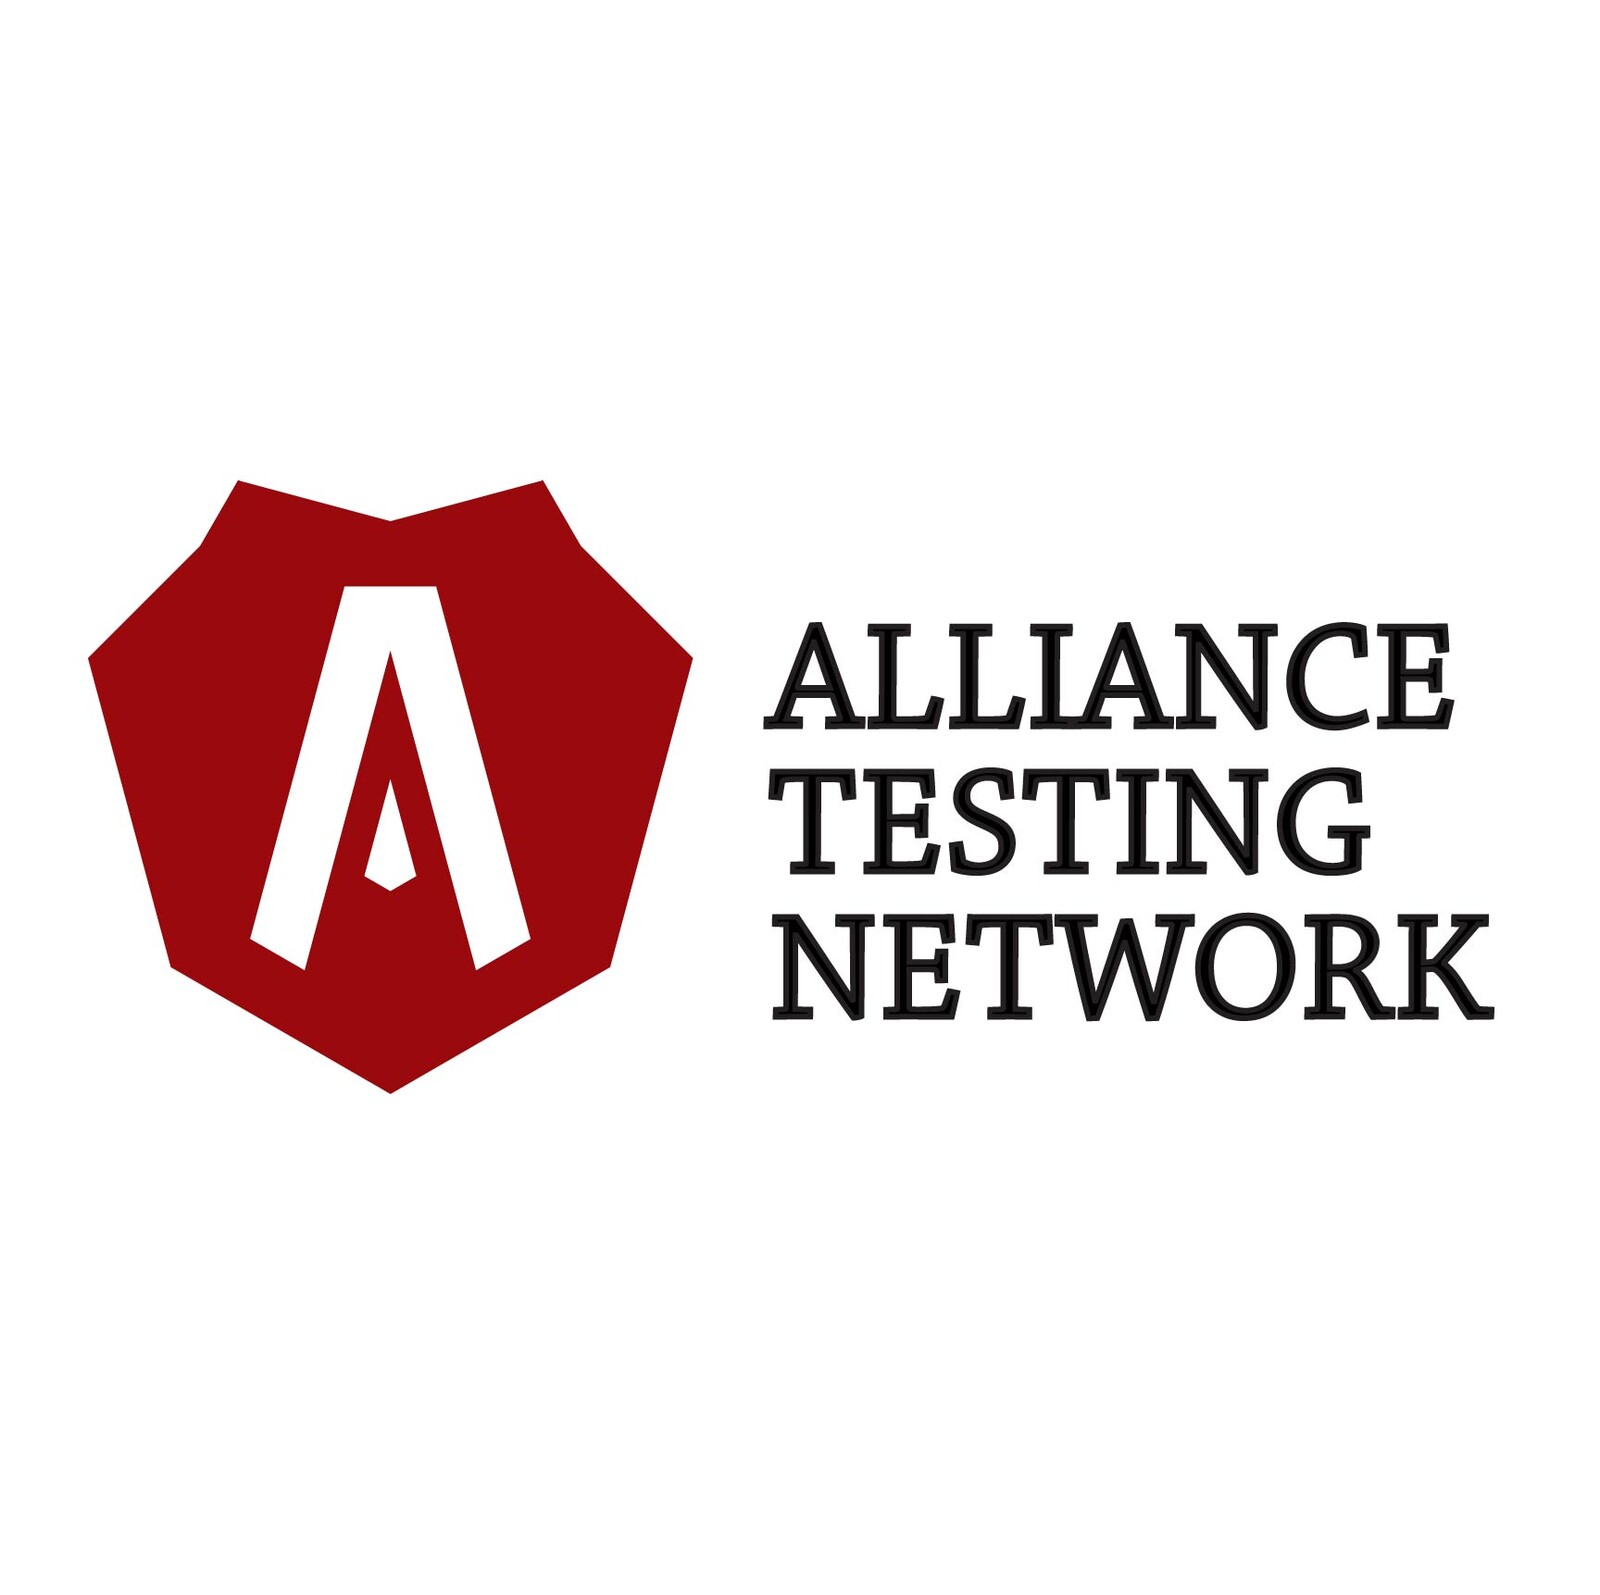 Logo made for the Alliance Testing Network (ATN). 
ATN was a group of streamers and pro gamers that hosted testing sessions for the Halo community in the Halo 5 era.